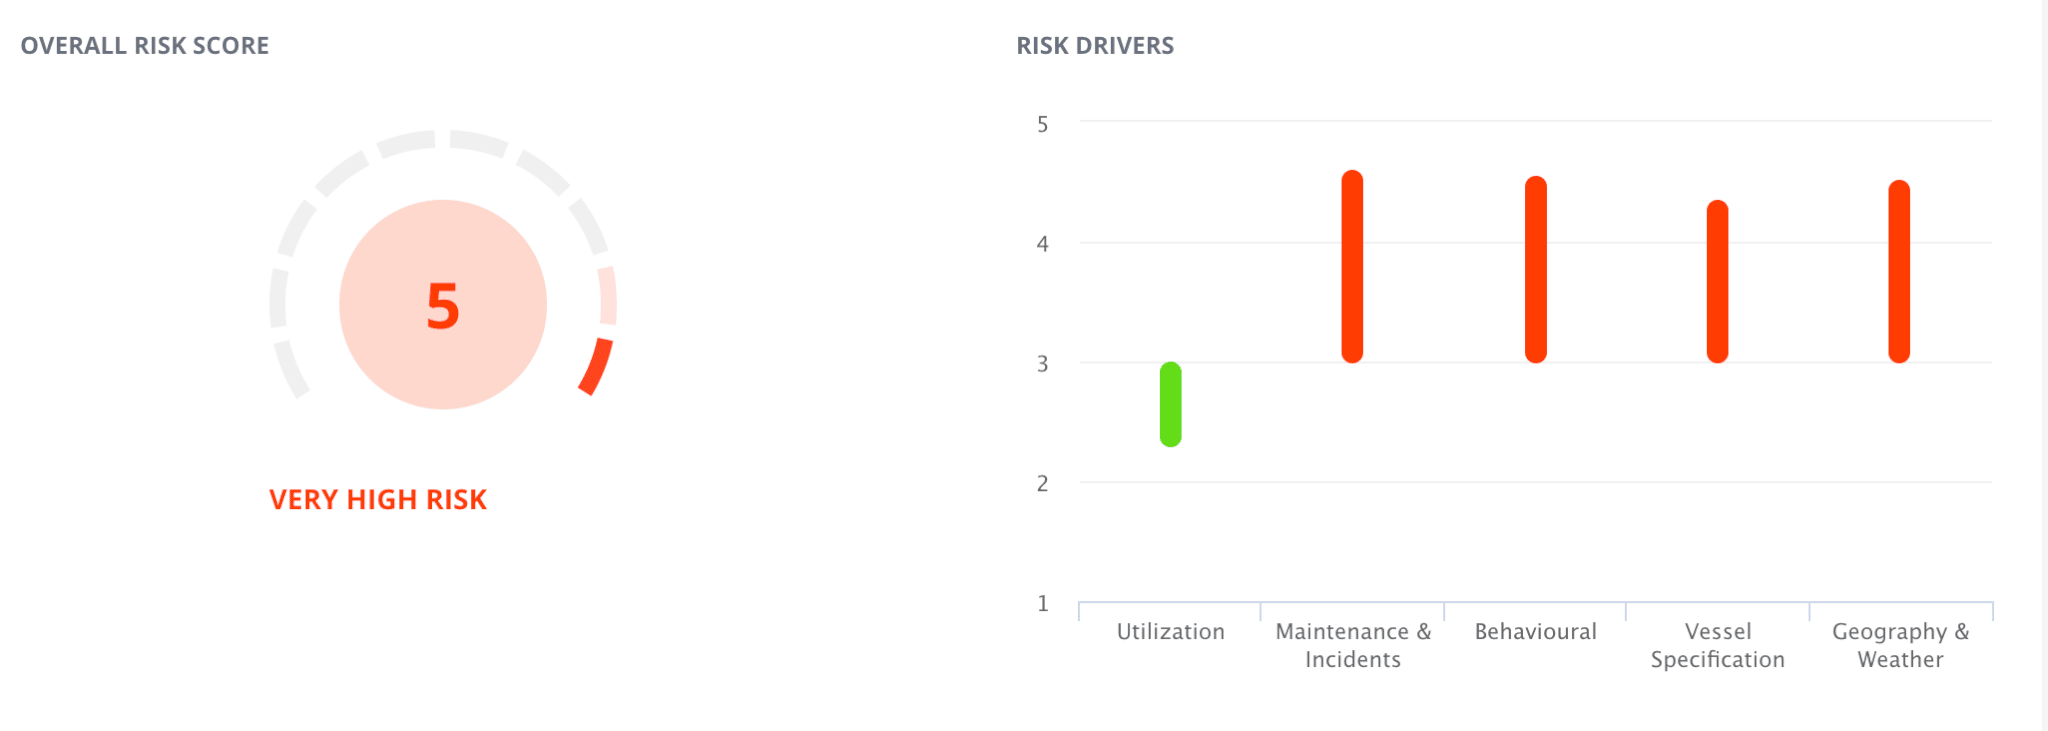 Screenshot of Insurance Risk for ship named Maestro from Windward system